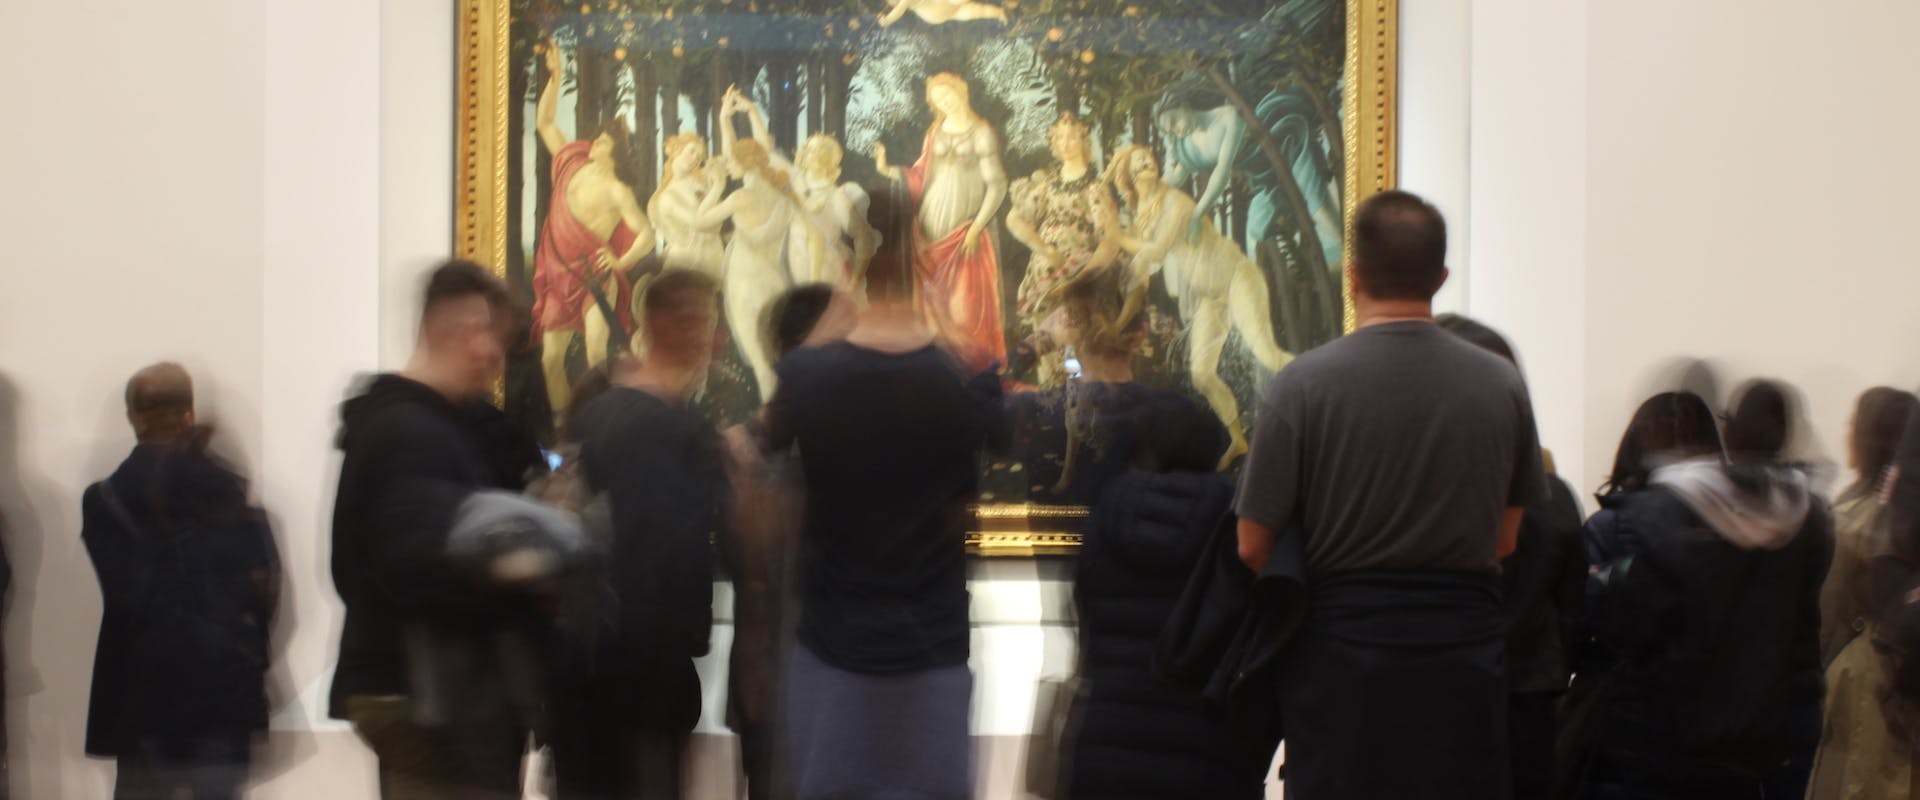 Uffizi Galleries: the most visited place of culture in Italy in 2021